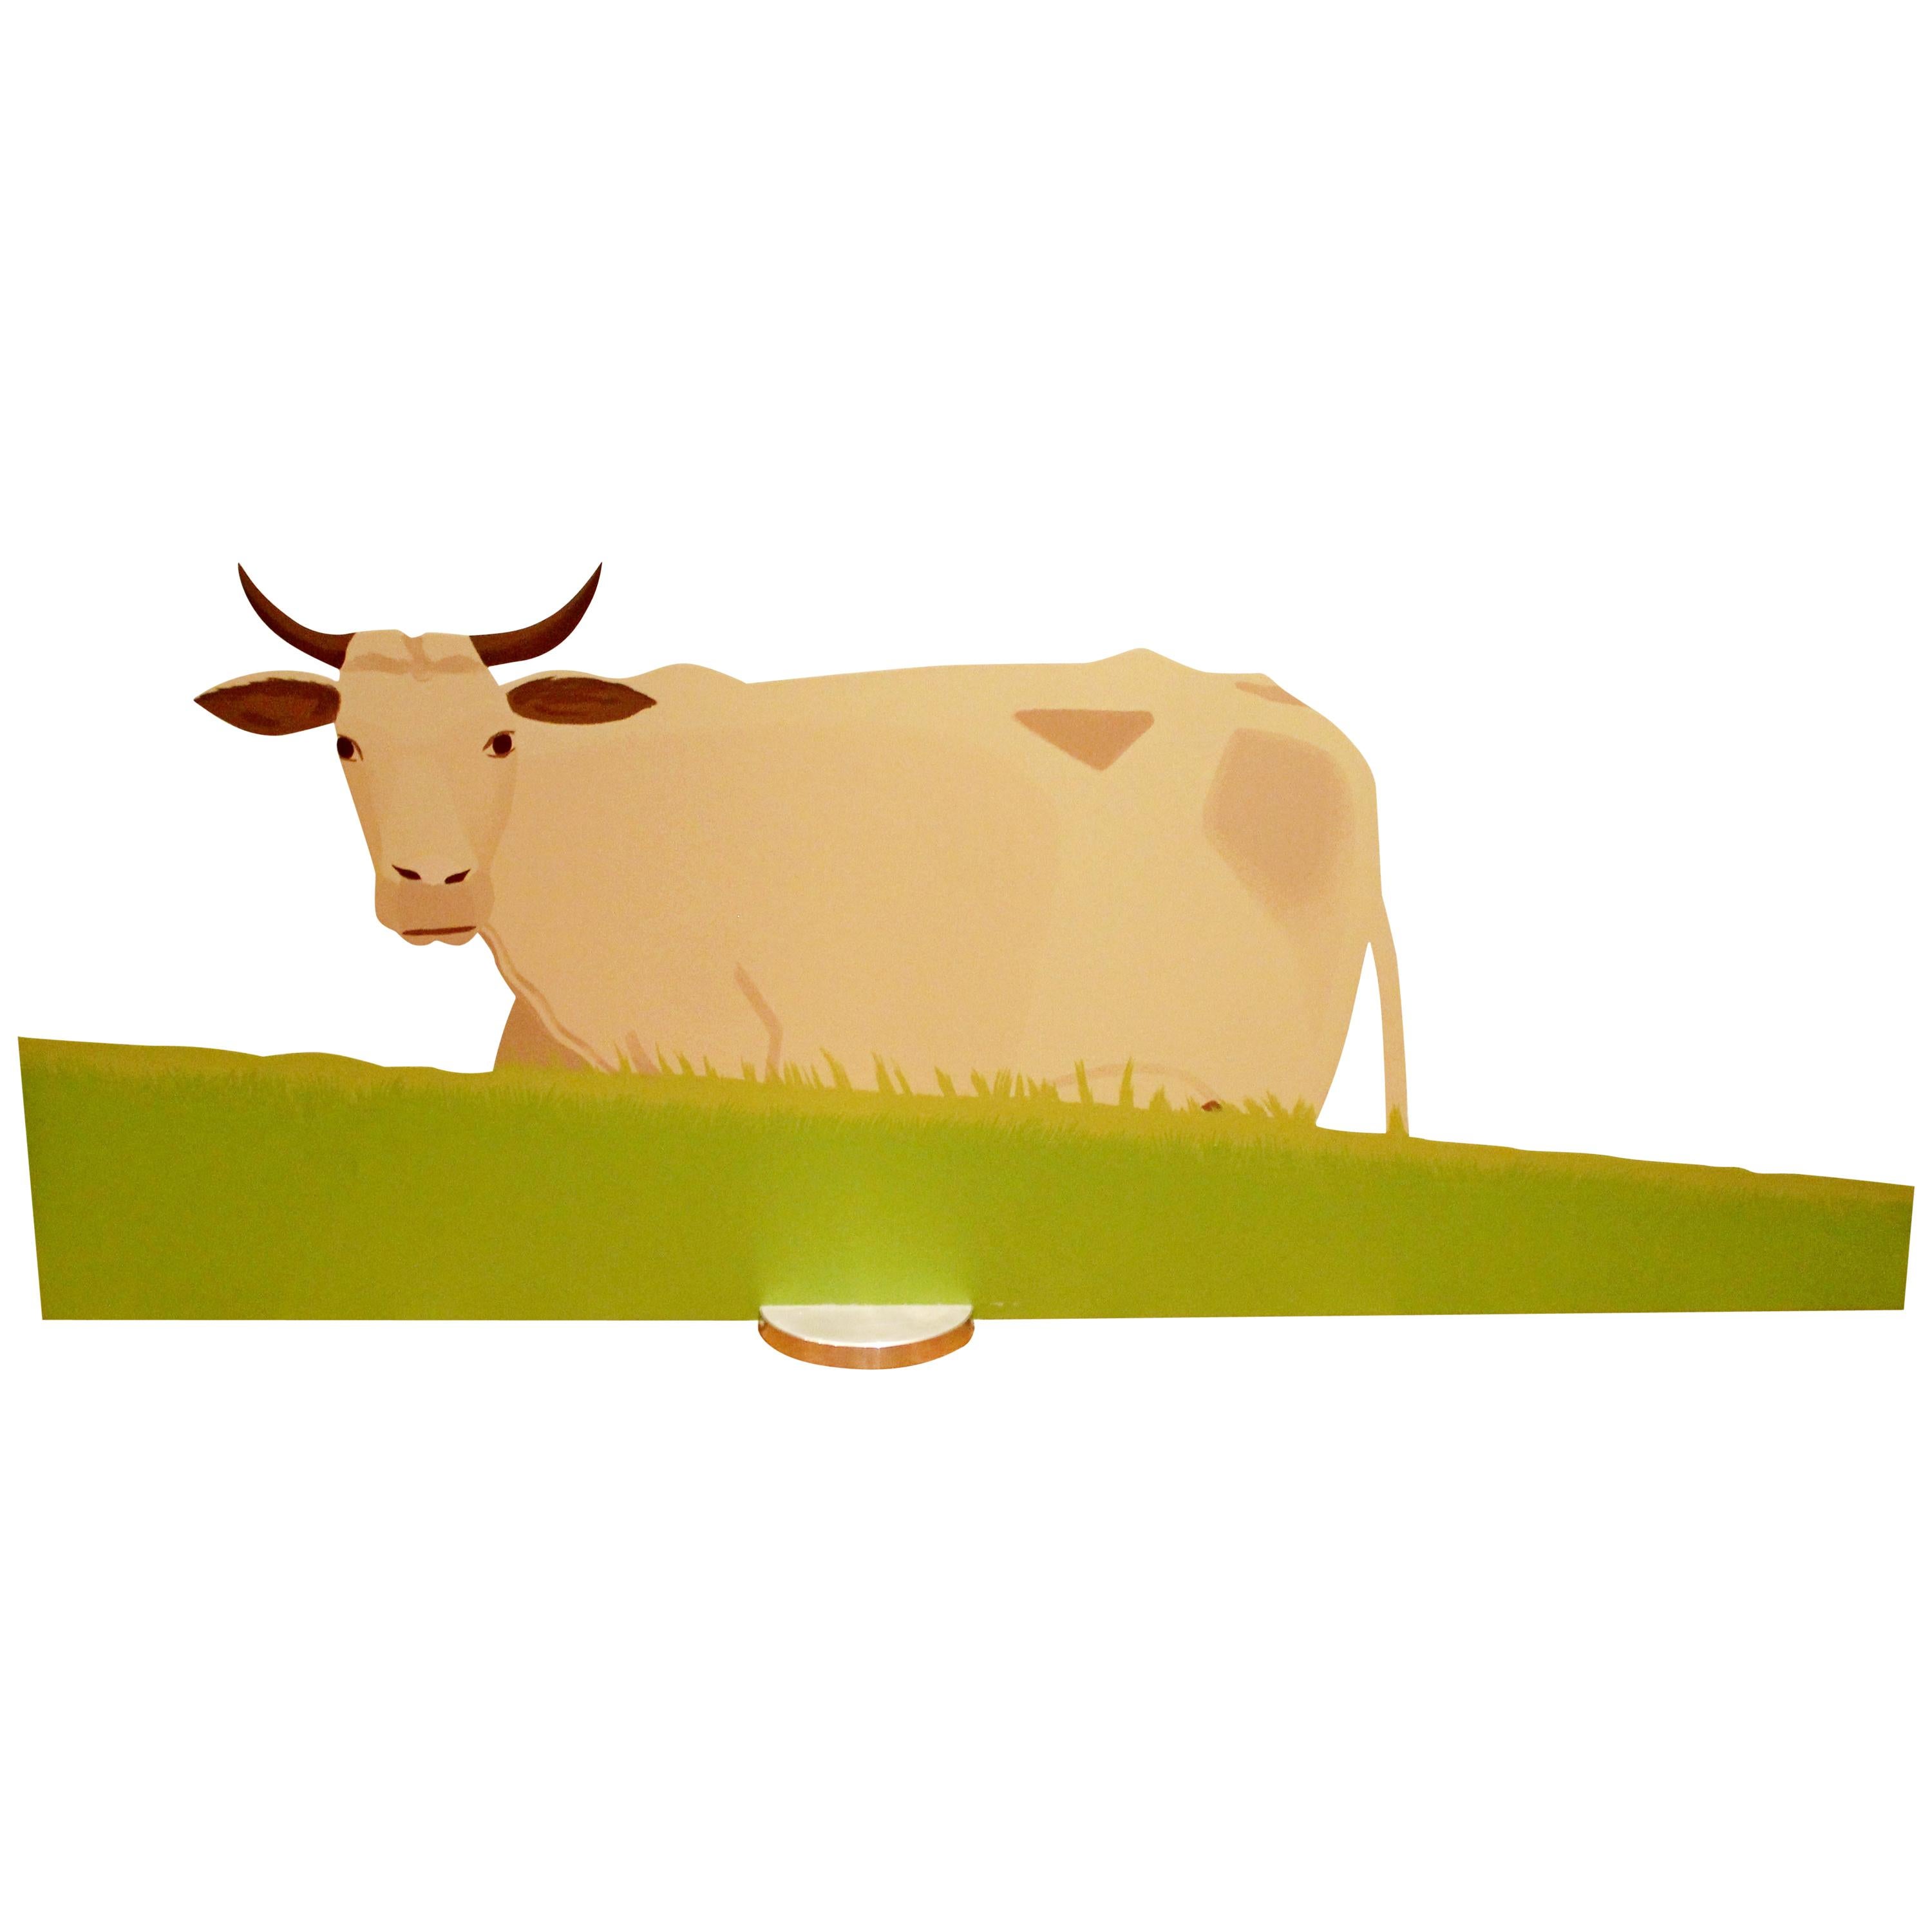 Contemporary 2D Metal Cow Table Sculpture A.P. Signed Numbered by Alex Katz 1/15